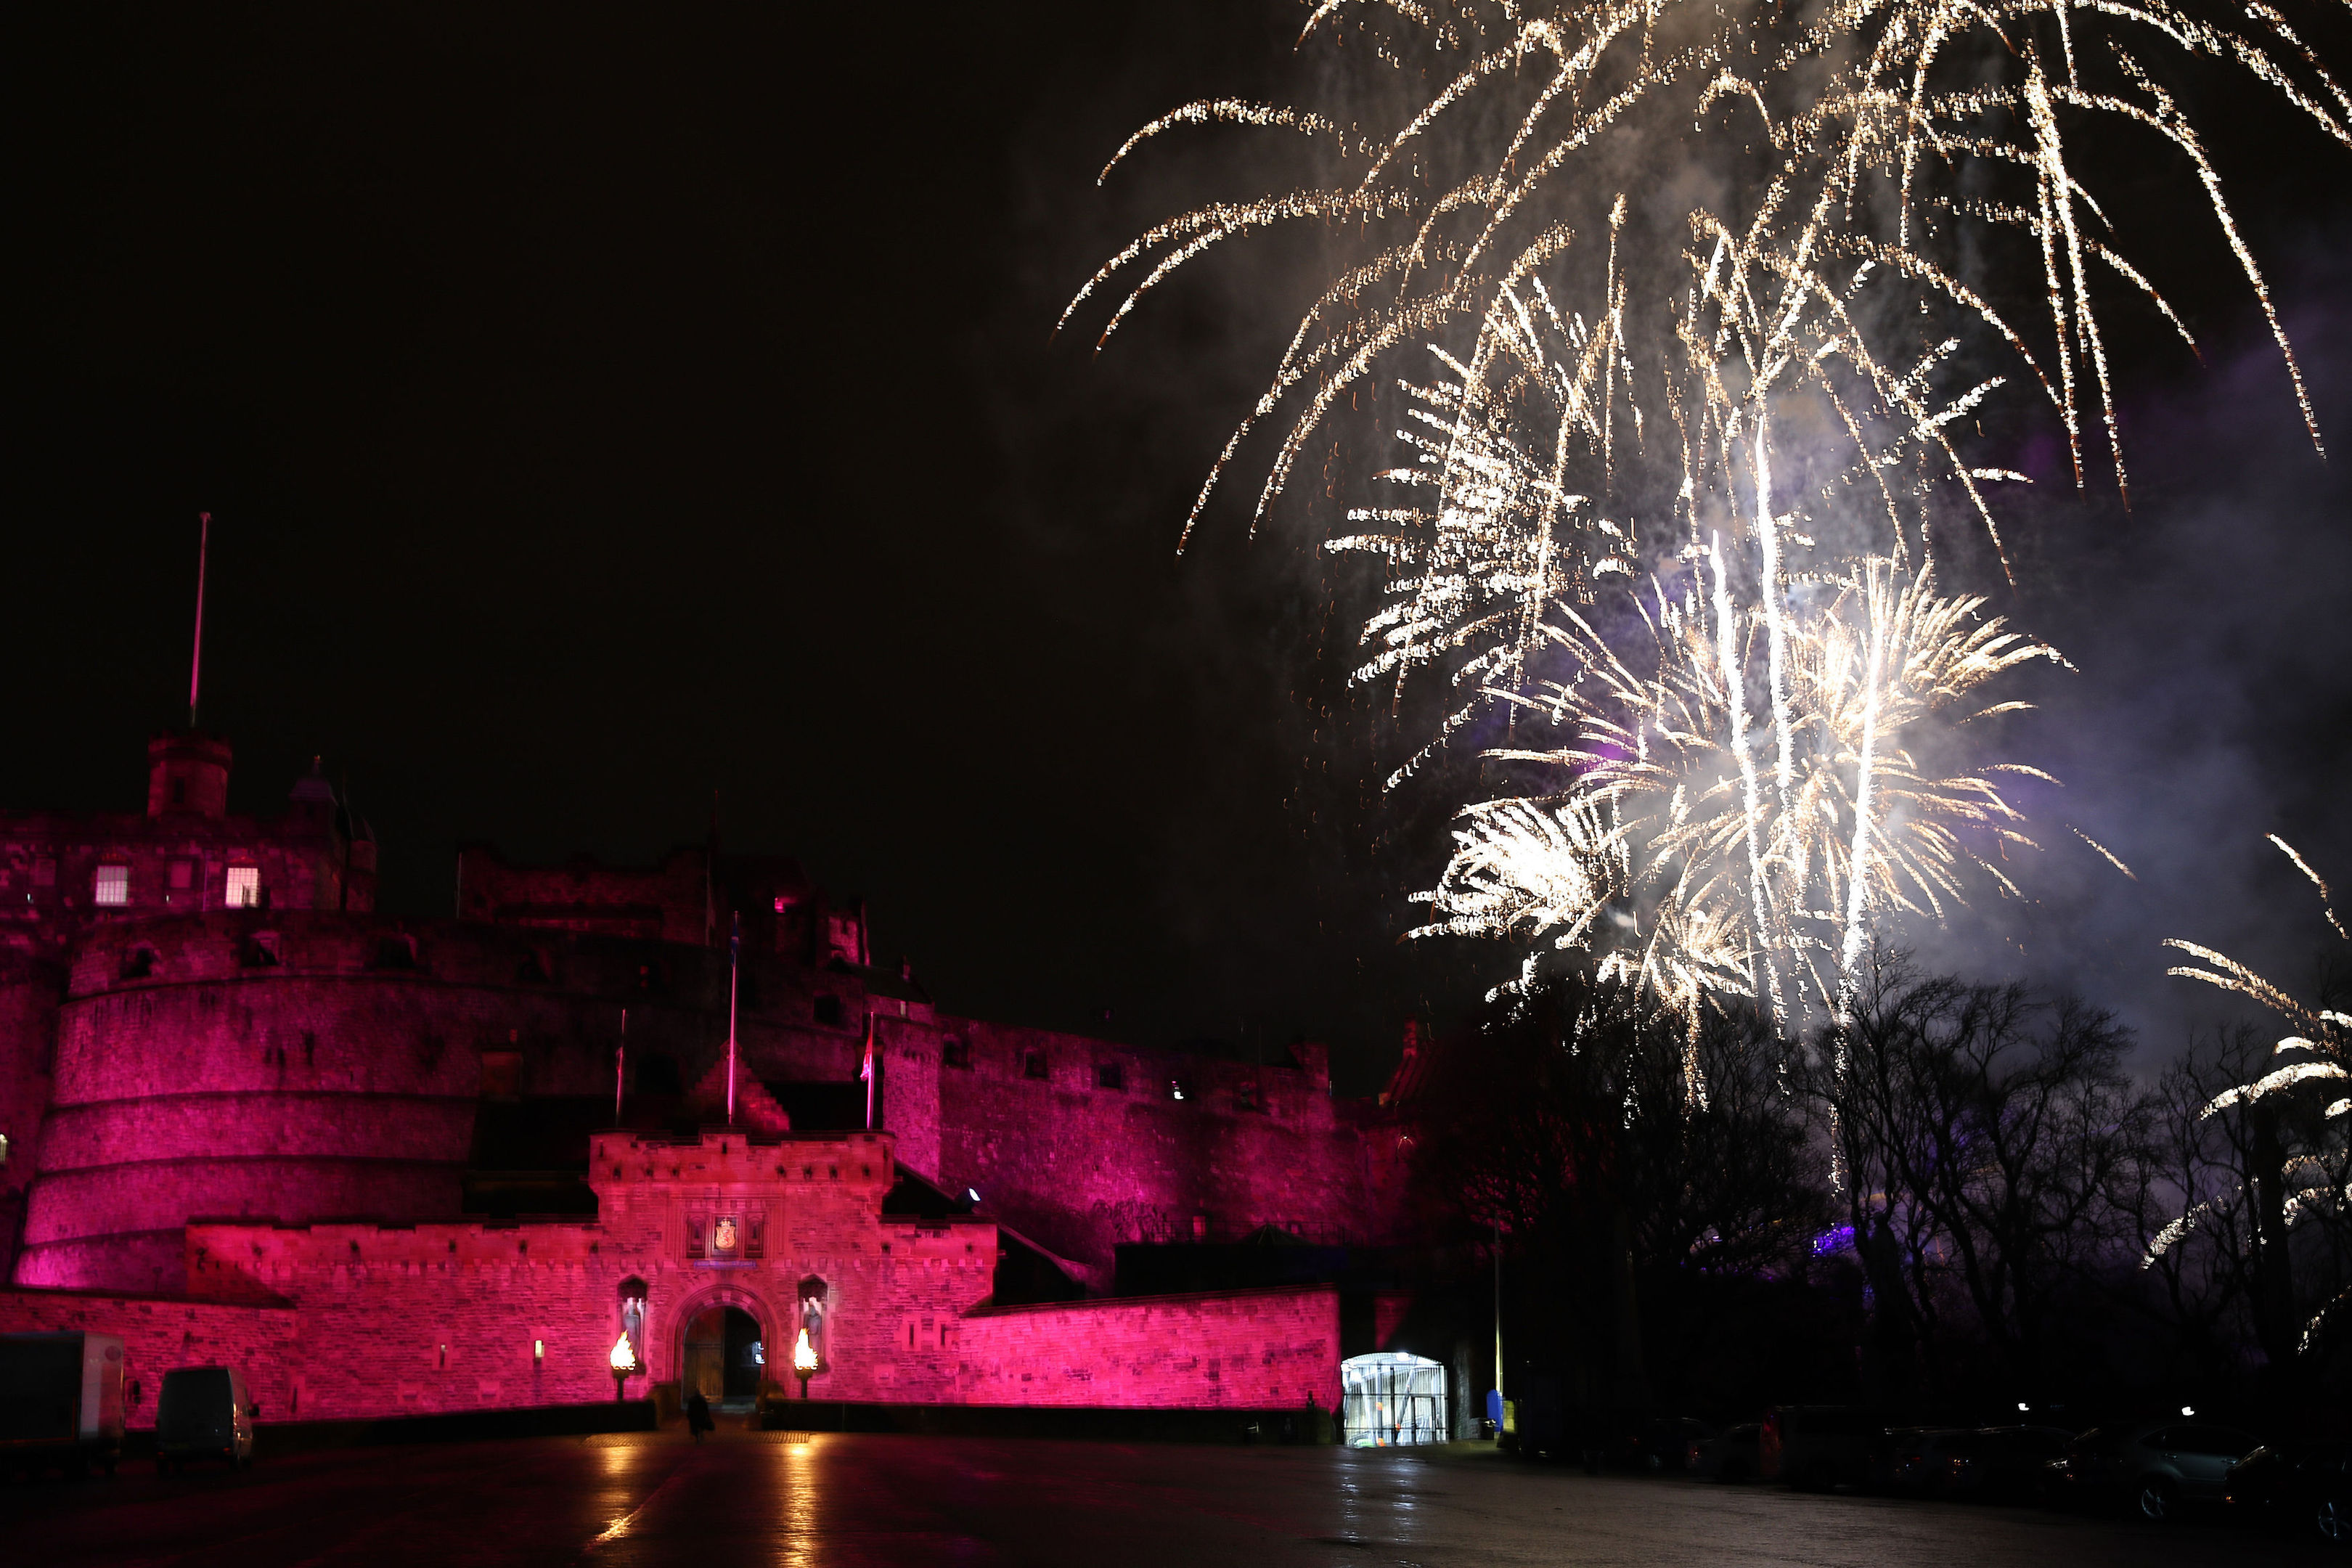 Fireworks light up the sky during the Hogmanay New Year celebrations in Edinburgh (Andrew Milligan/PA Wire)